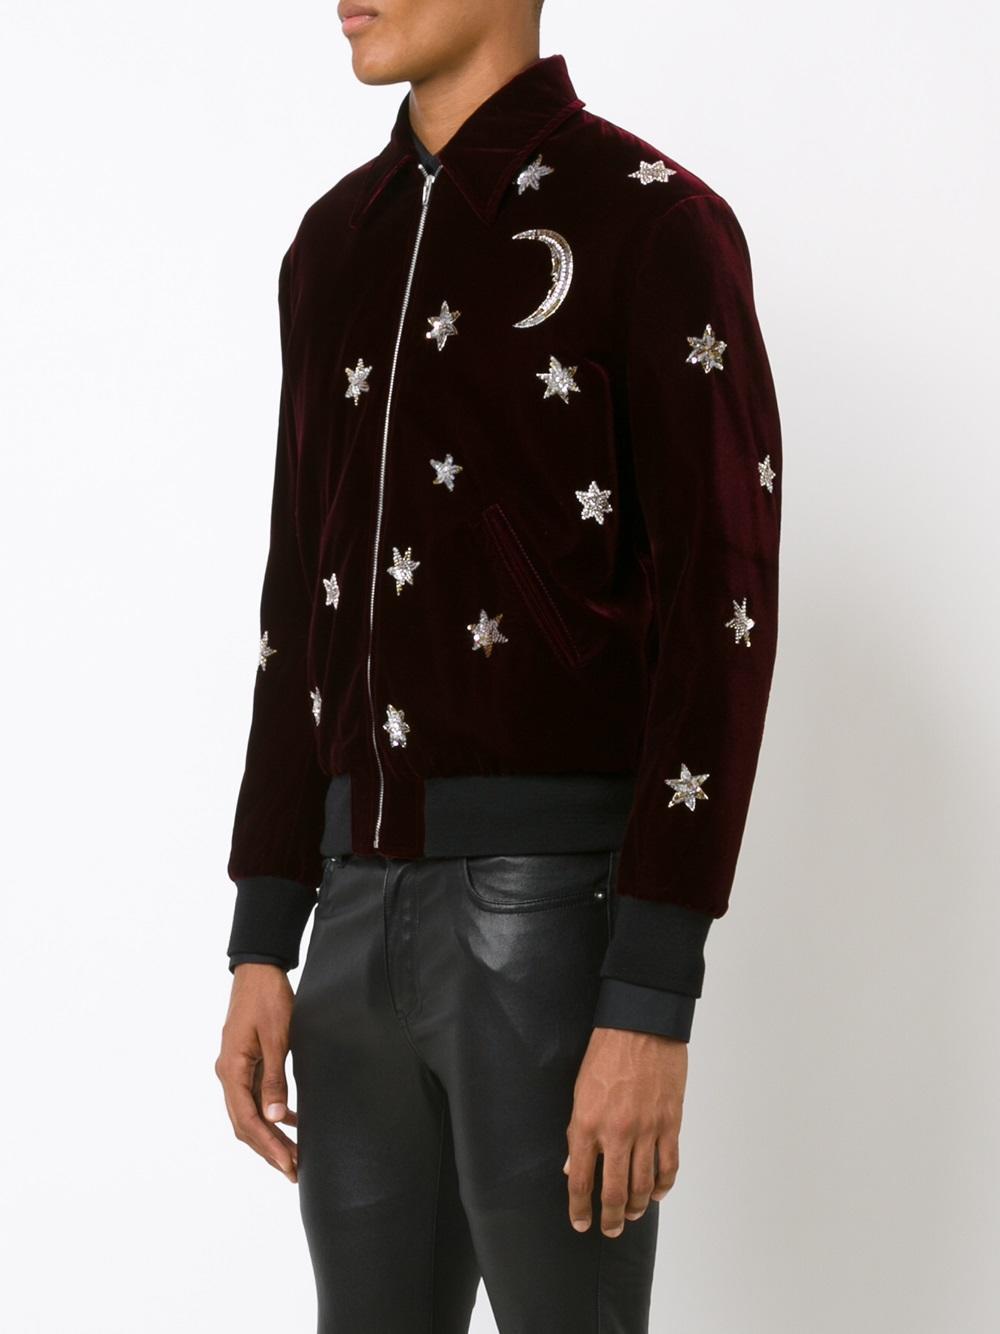 Saint Laurent Cotton Star And Moon Embellished Bomber Jacket in 